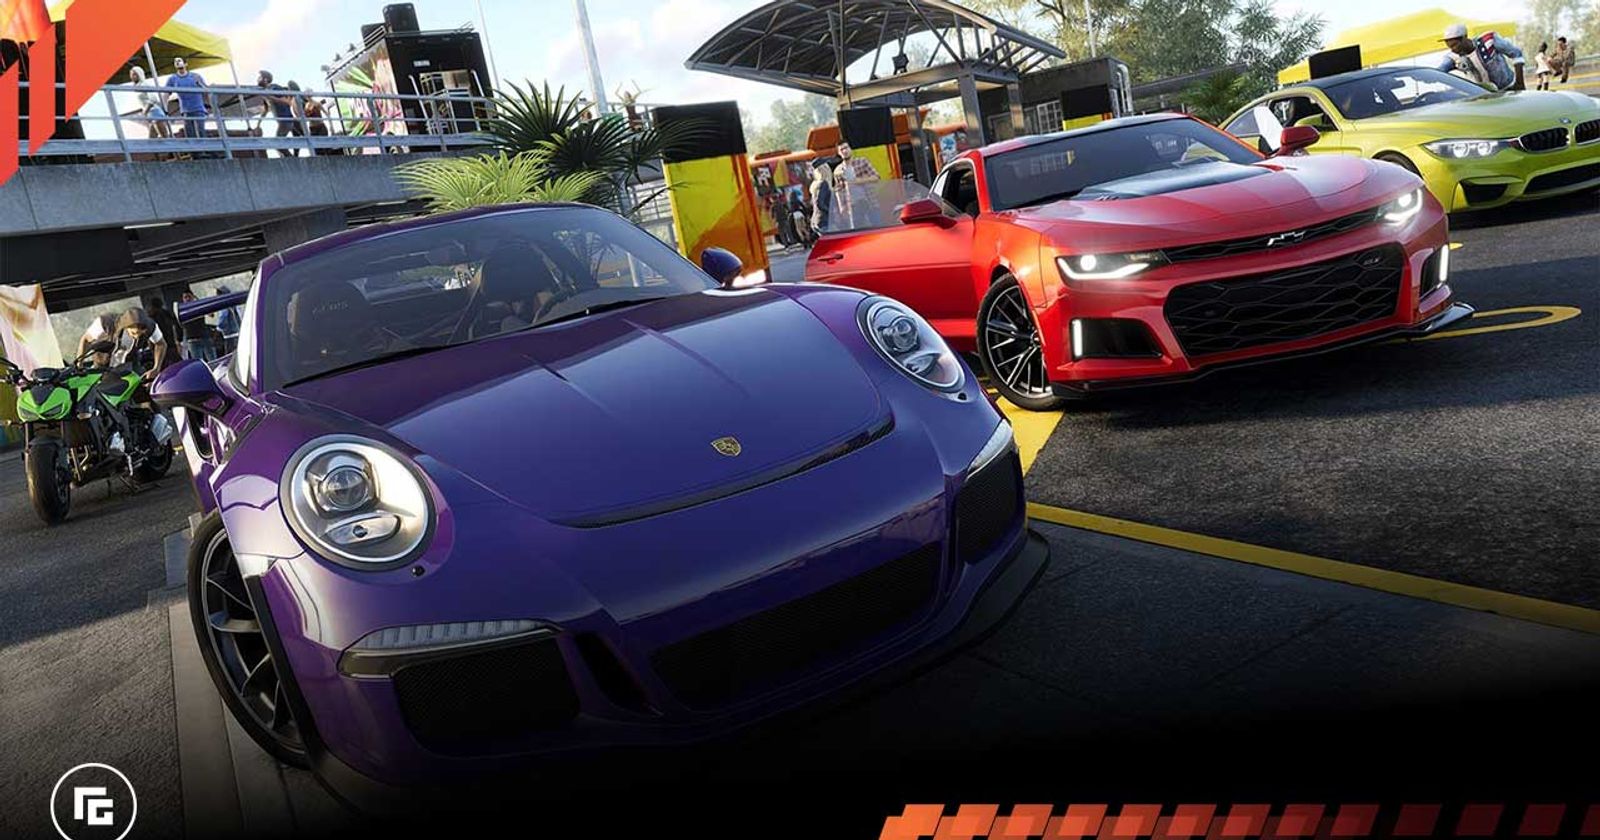 The Crew 2 will be free-to-play from 6th to 10th July